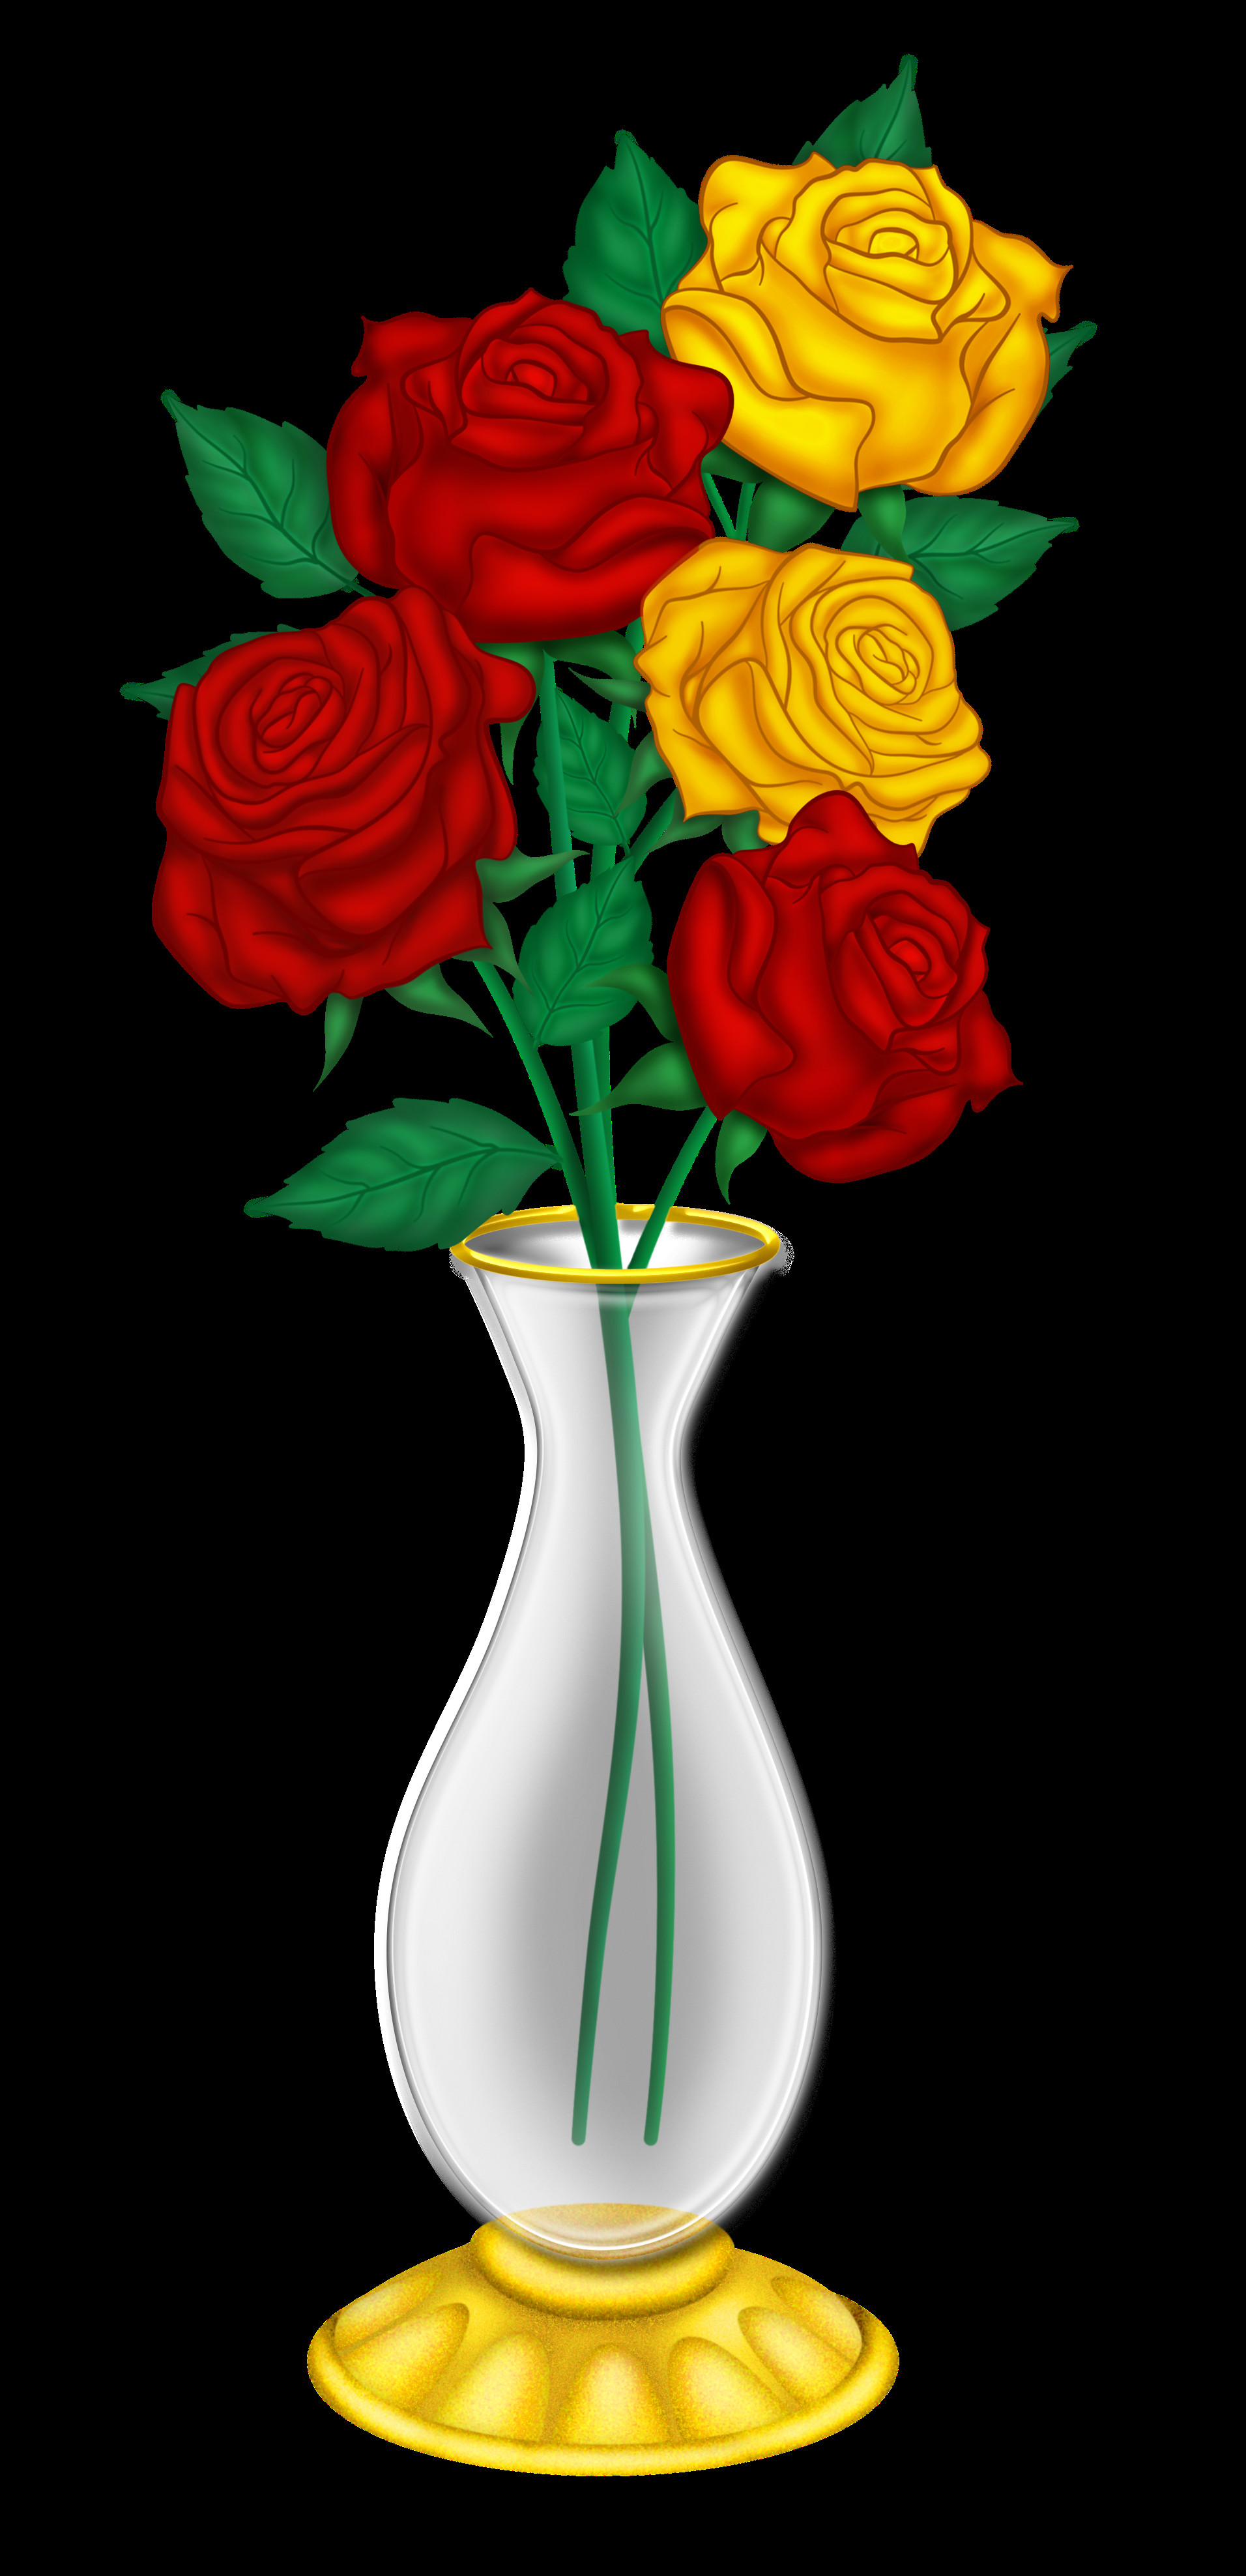 18 Trendy Yellow Rose Vase 2024 free download yellow rose vase of 1866 rose vase stock vector illustration and royalty free rose within view all vase clipart colorful